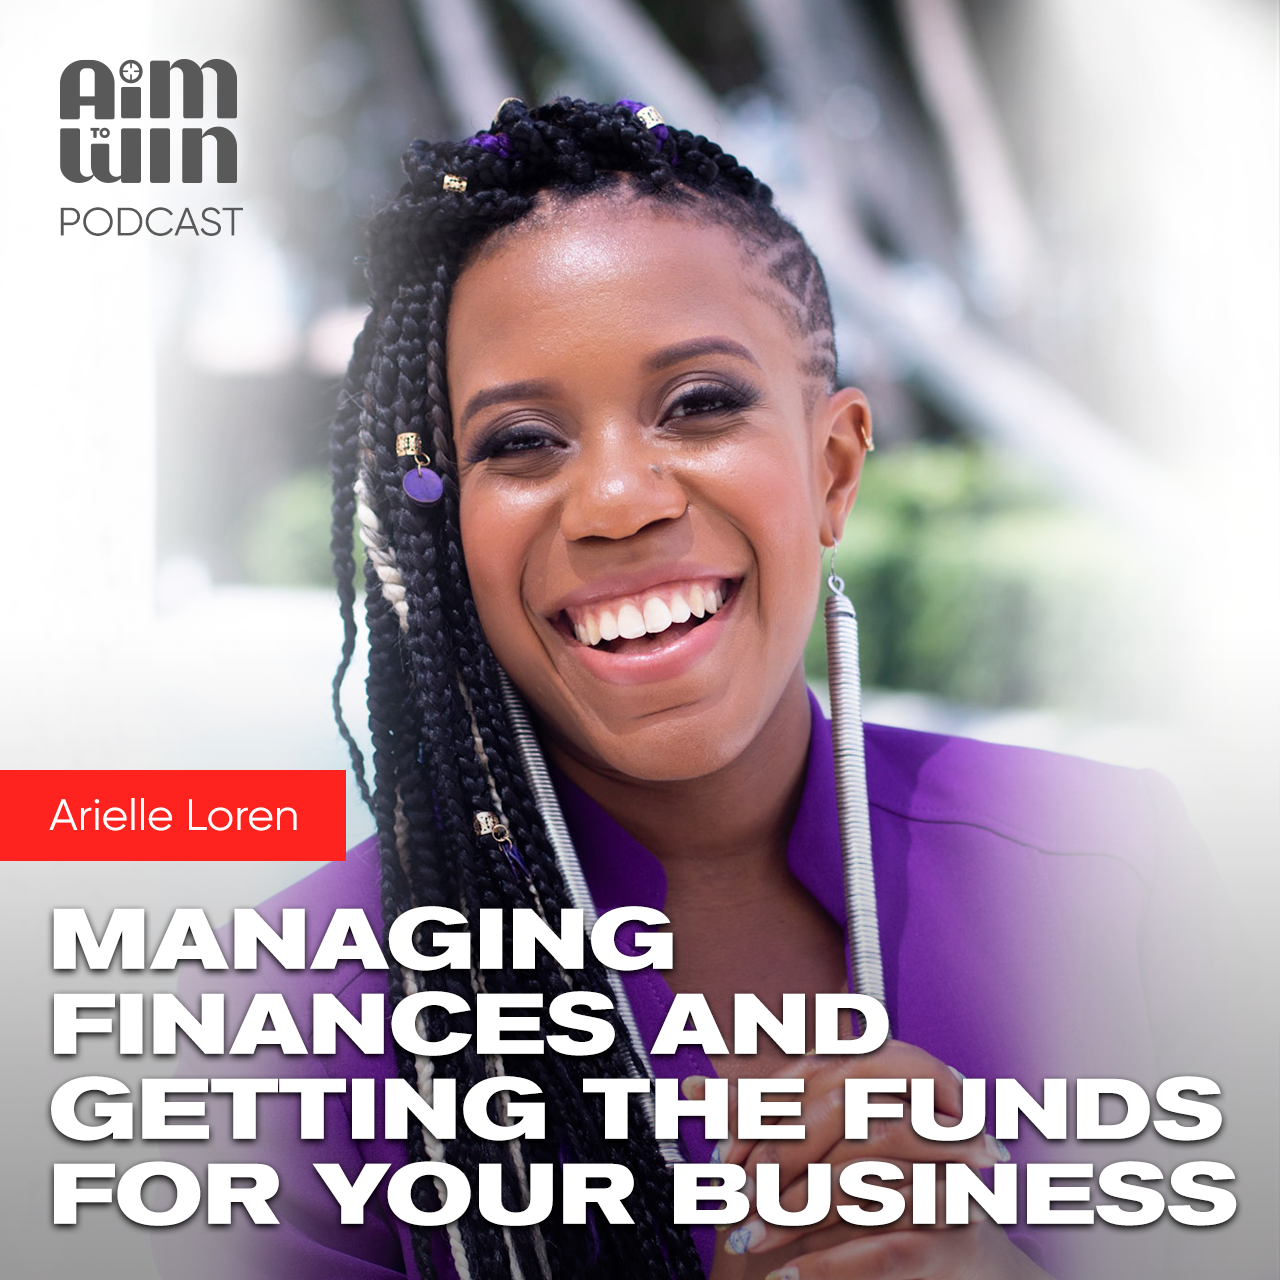 Managing Finances and Getting the Funds for Your Business with Arielle Loren